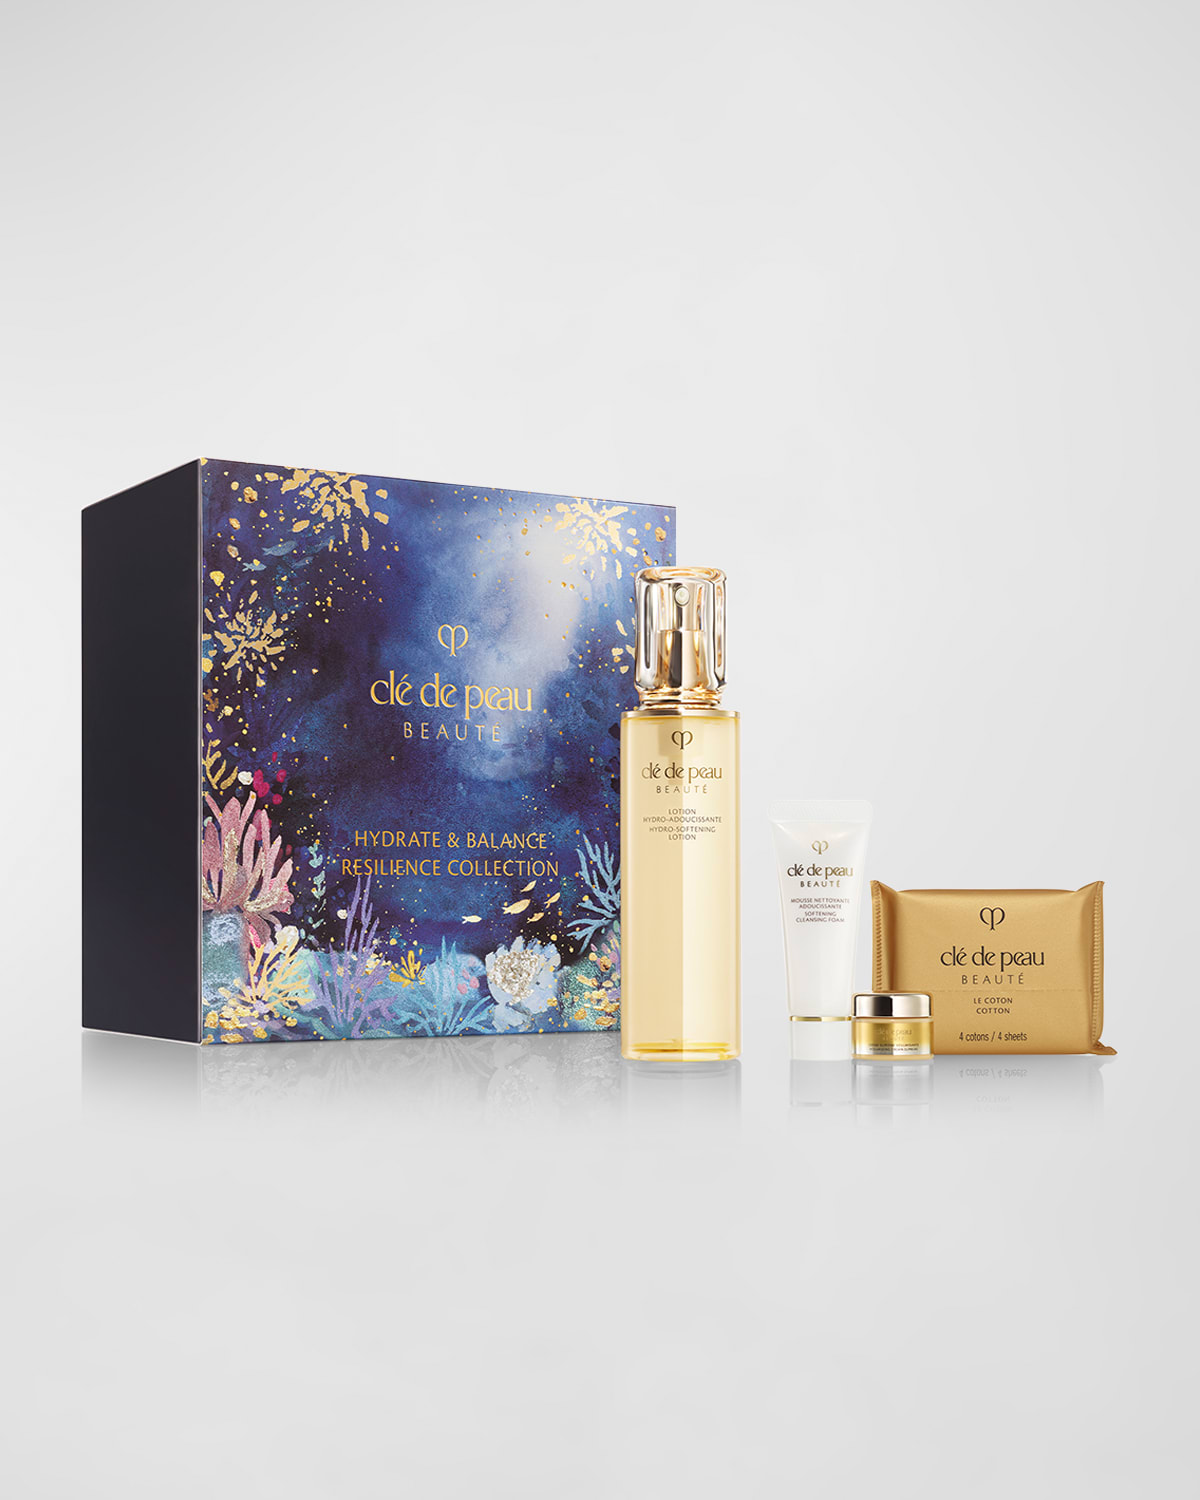 Limited Edition Hydrate & Balance Resilience Collection ($176 Value)